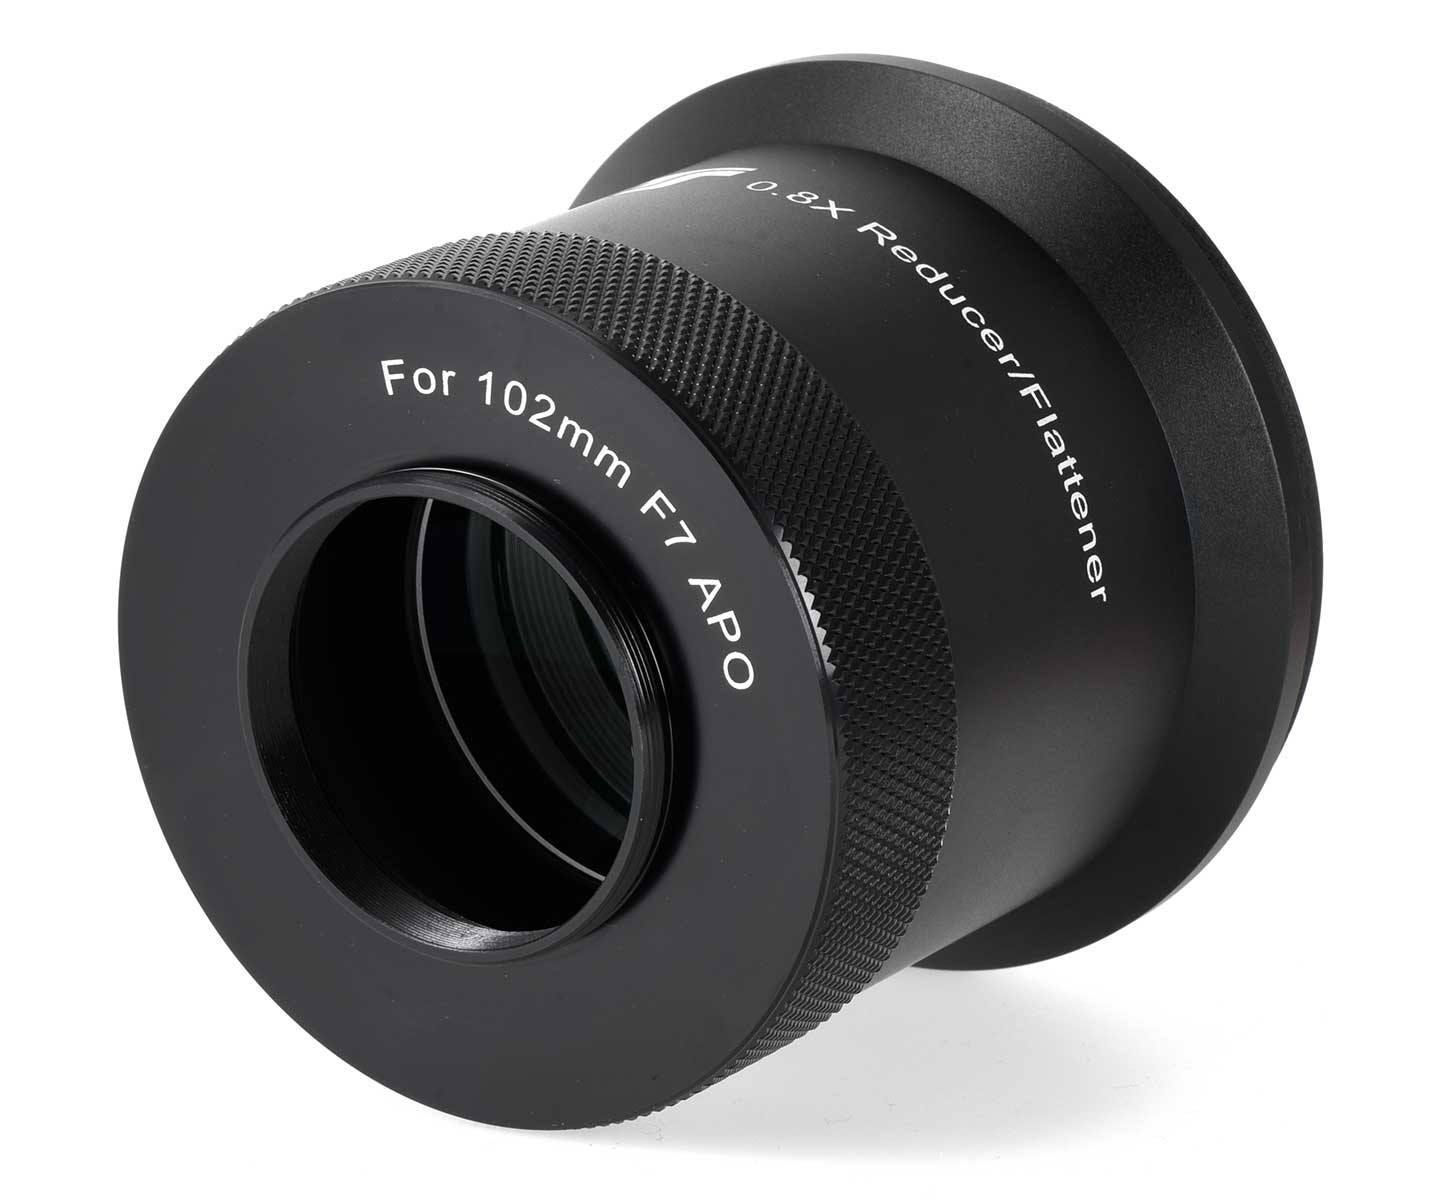  The corrector and focal reducer is designed for the TSCFAPO102 and allows astrophotography through this telescope. [EN] 